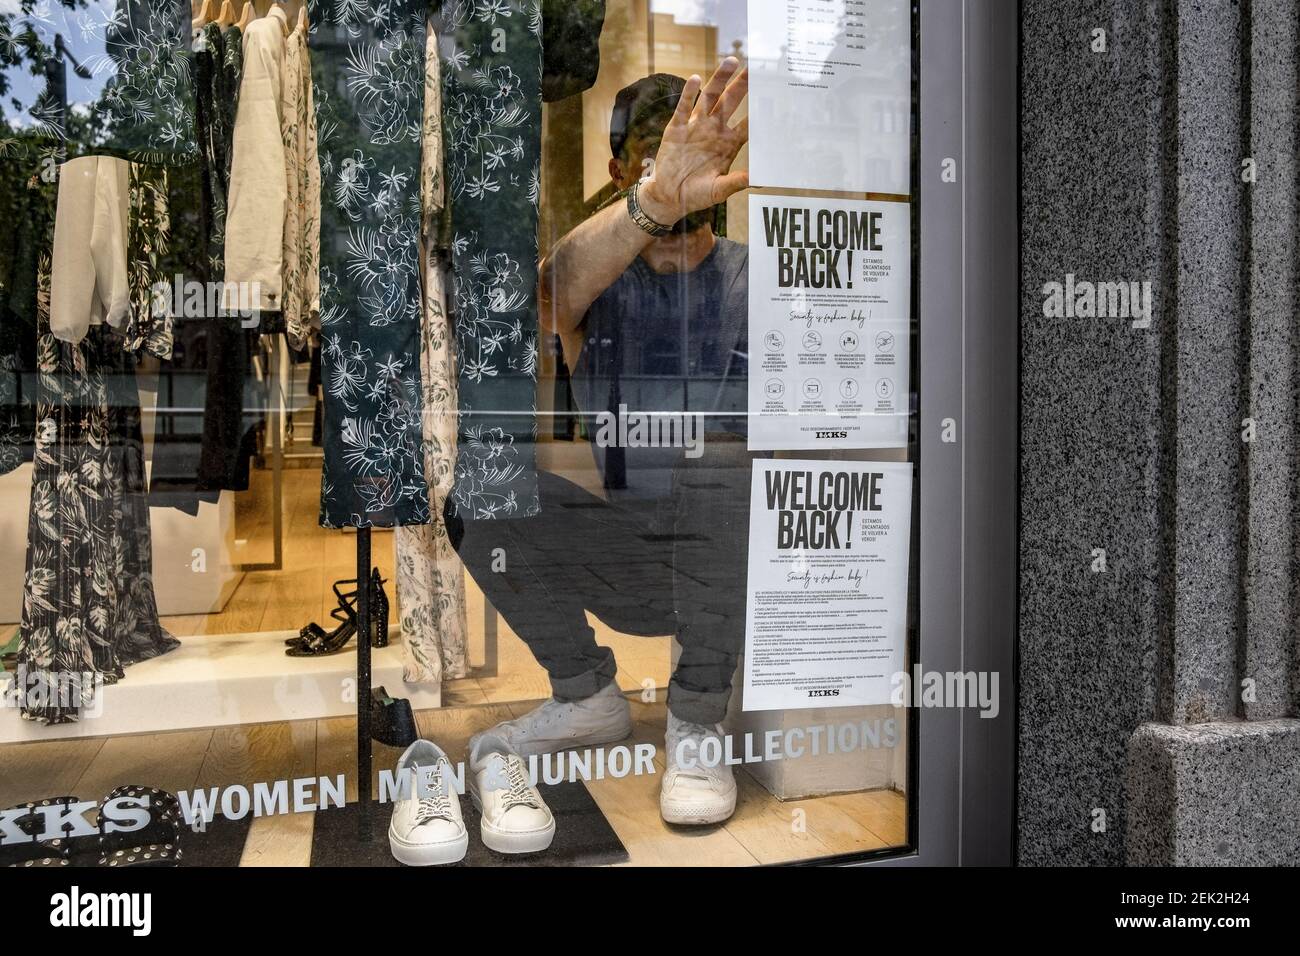 A seller of the IKKS clothing store is seen placing welcome signs in the  shop window during Phase Zero of the breakdown of confinement due to the  Covid-19 pandemic. After 60 days